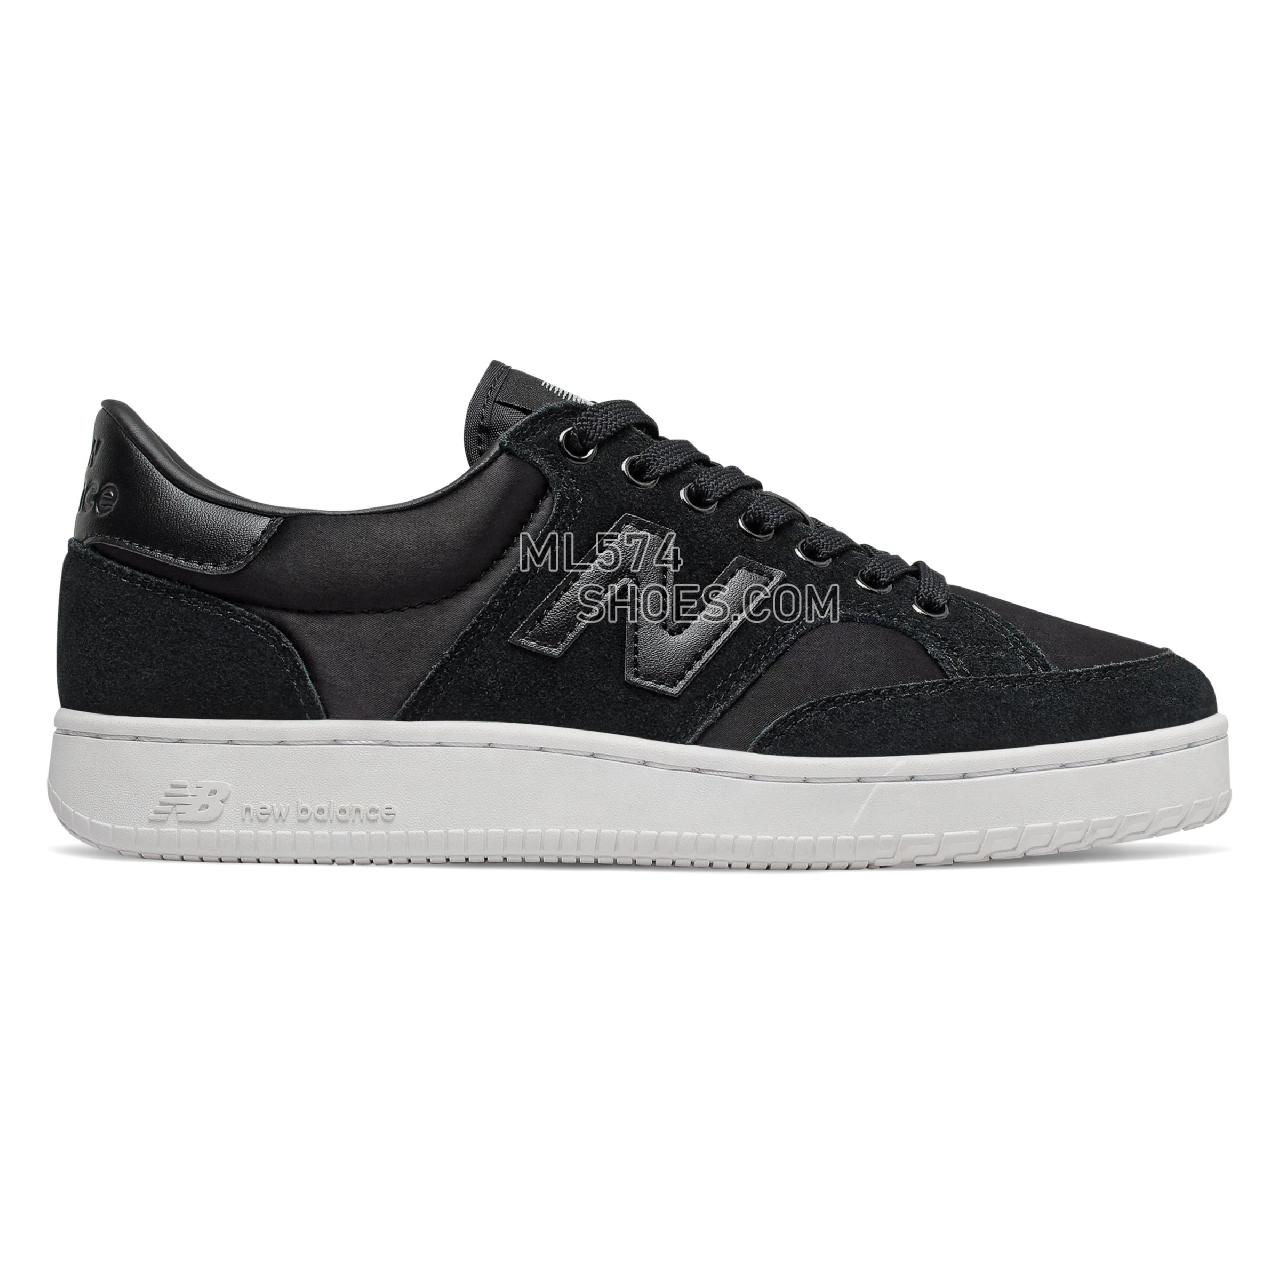 New Balance Pro Court Cup - Women's Court Classics - Black with Munsell White - PROWTCLB